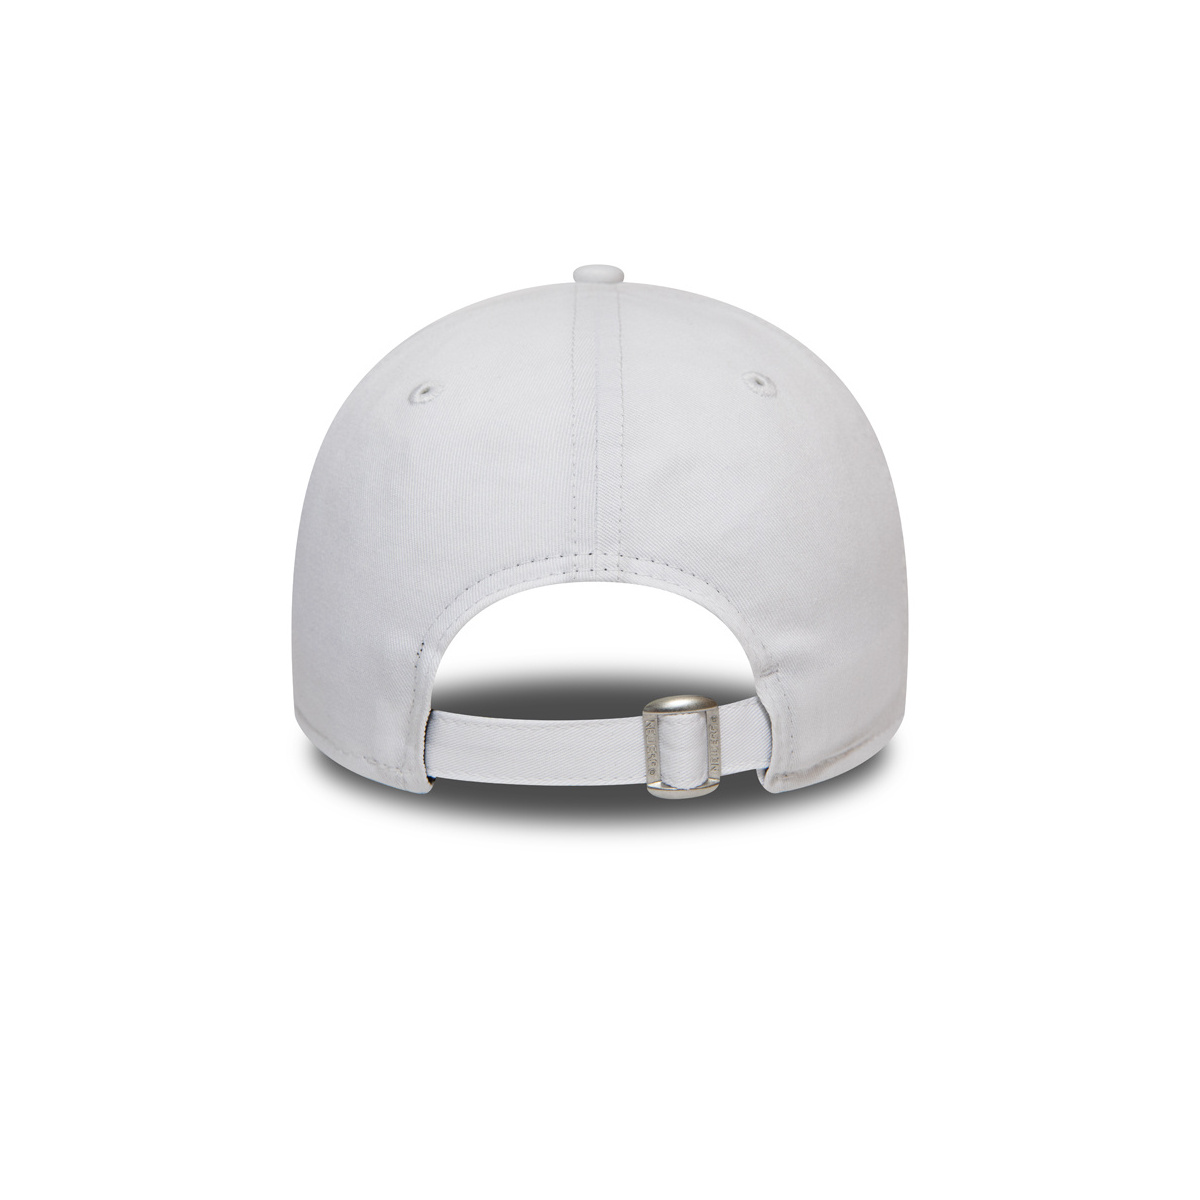 Casquette NY Yankees Essential 9Forty Coton Blanche- New Era Reference :  10668